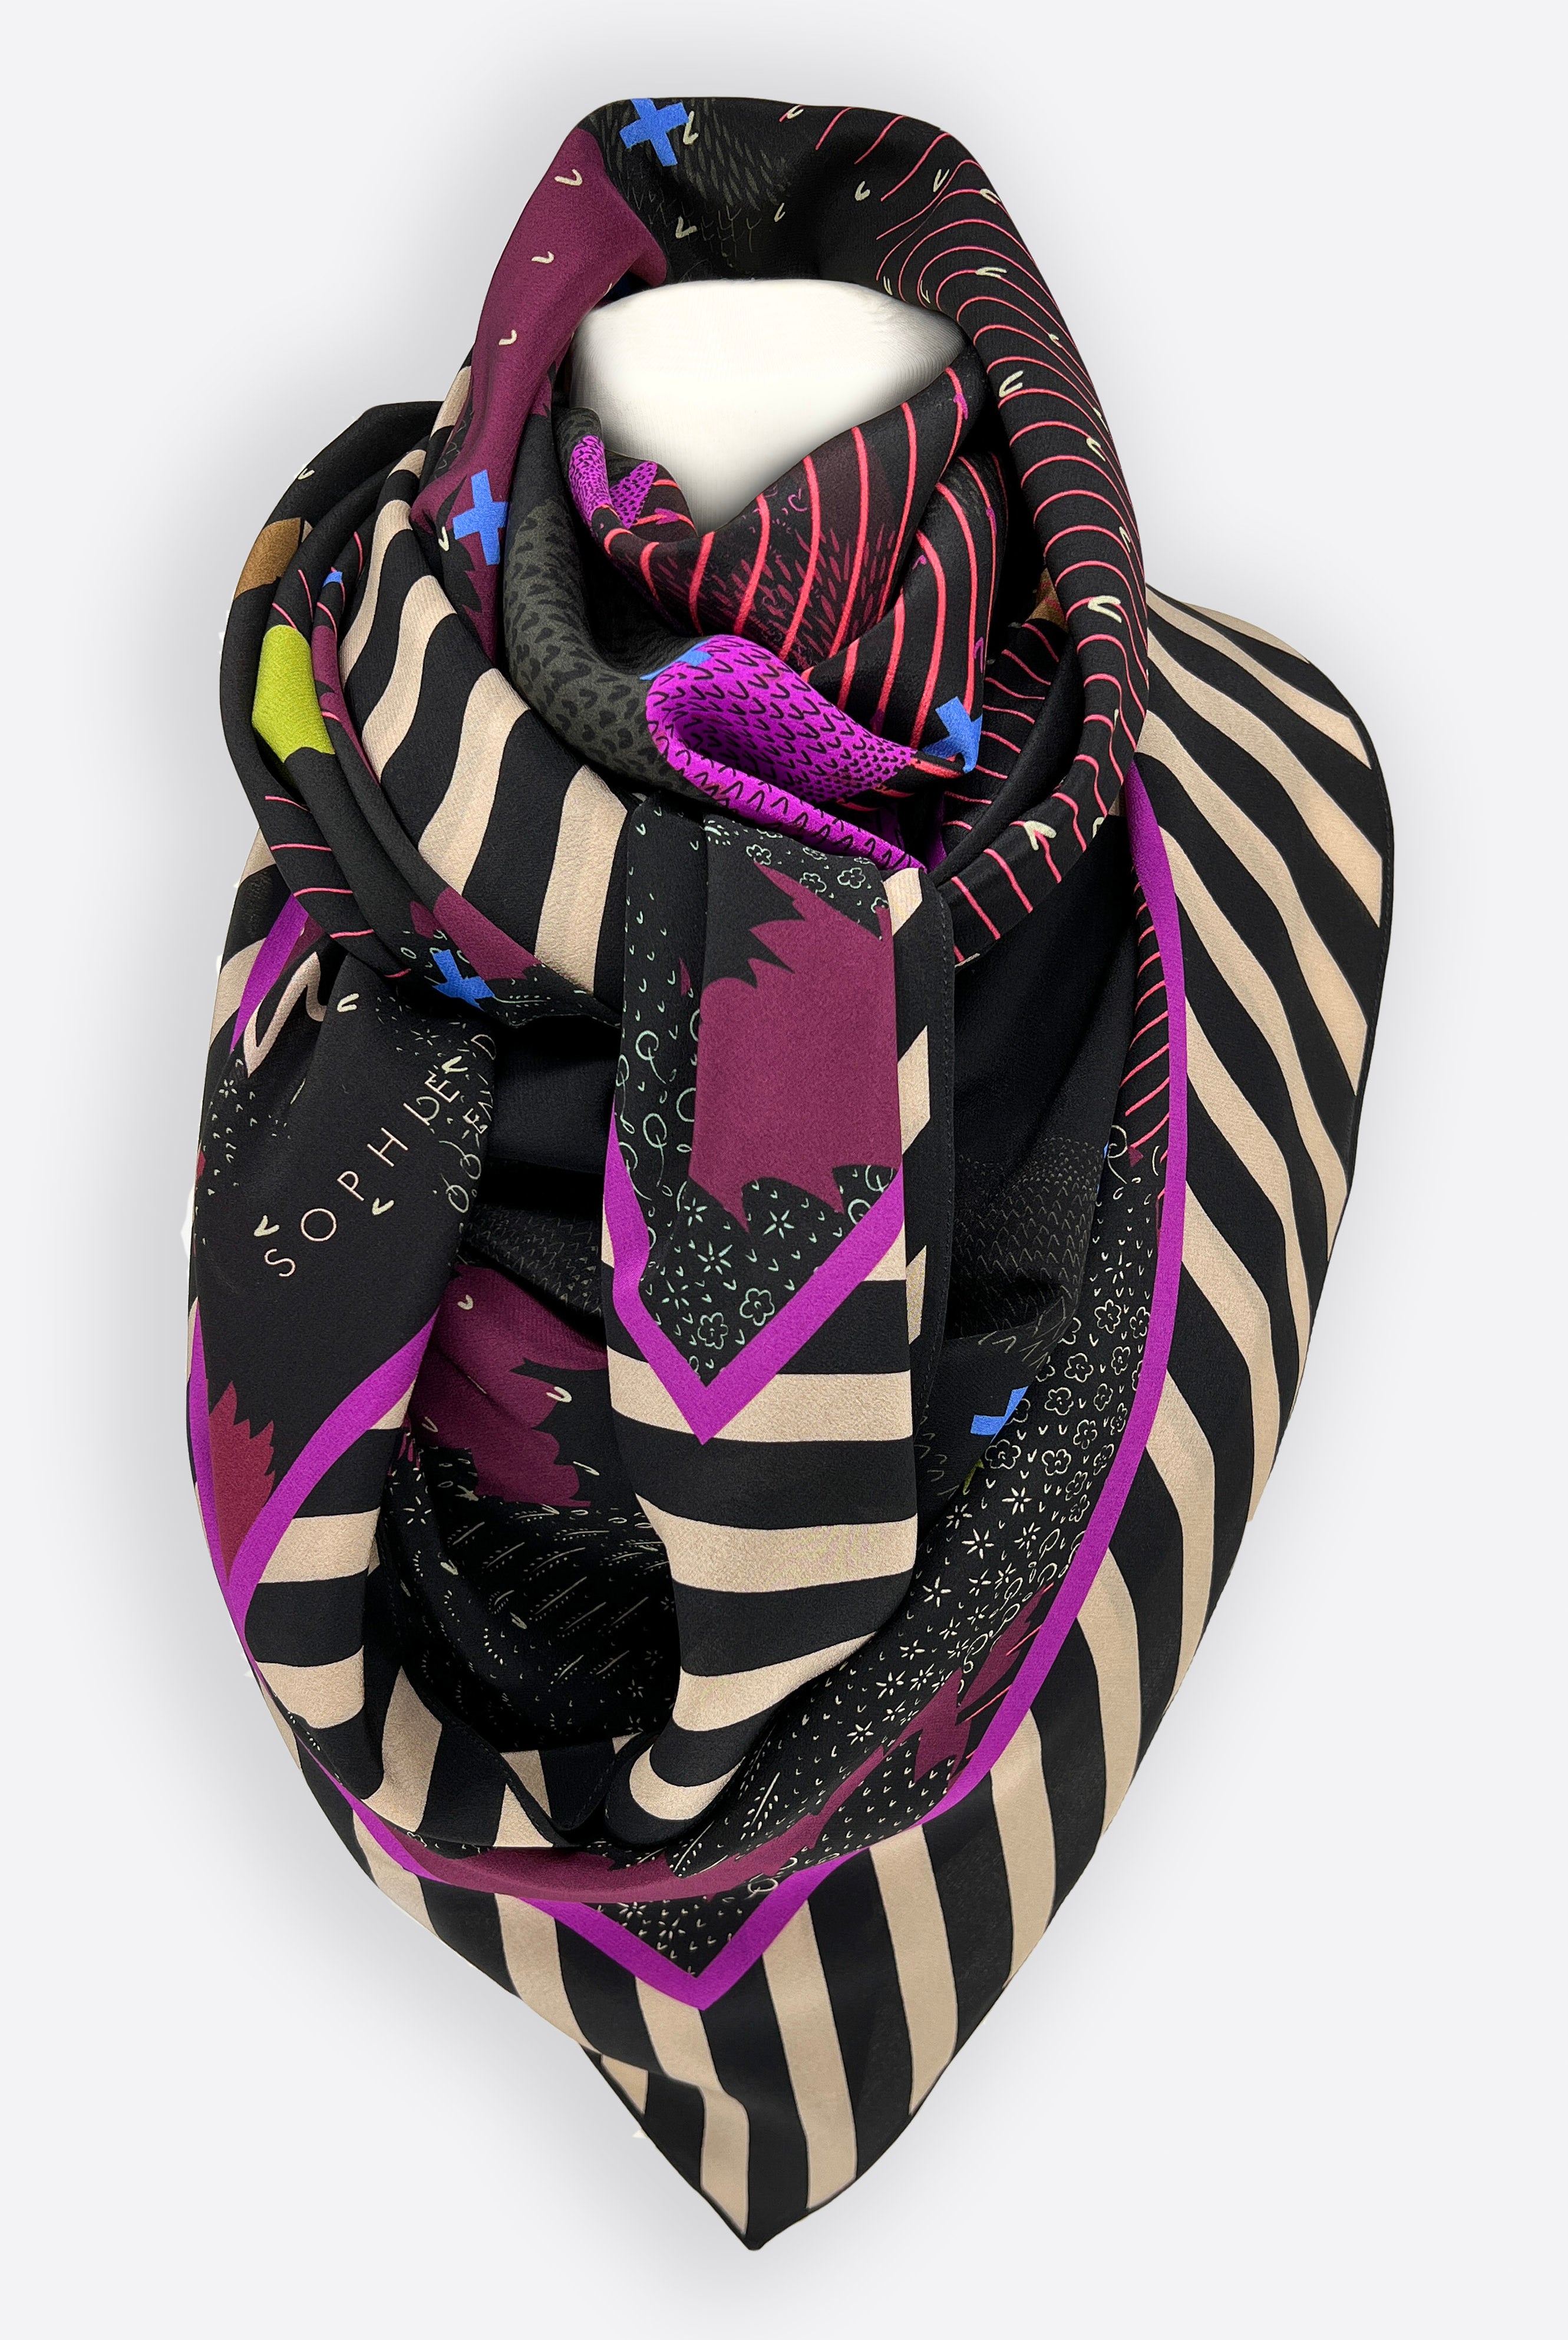 A large silk scarf tied around the neck of a mannequin in purple, black and beige.